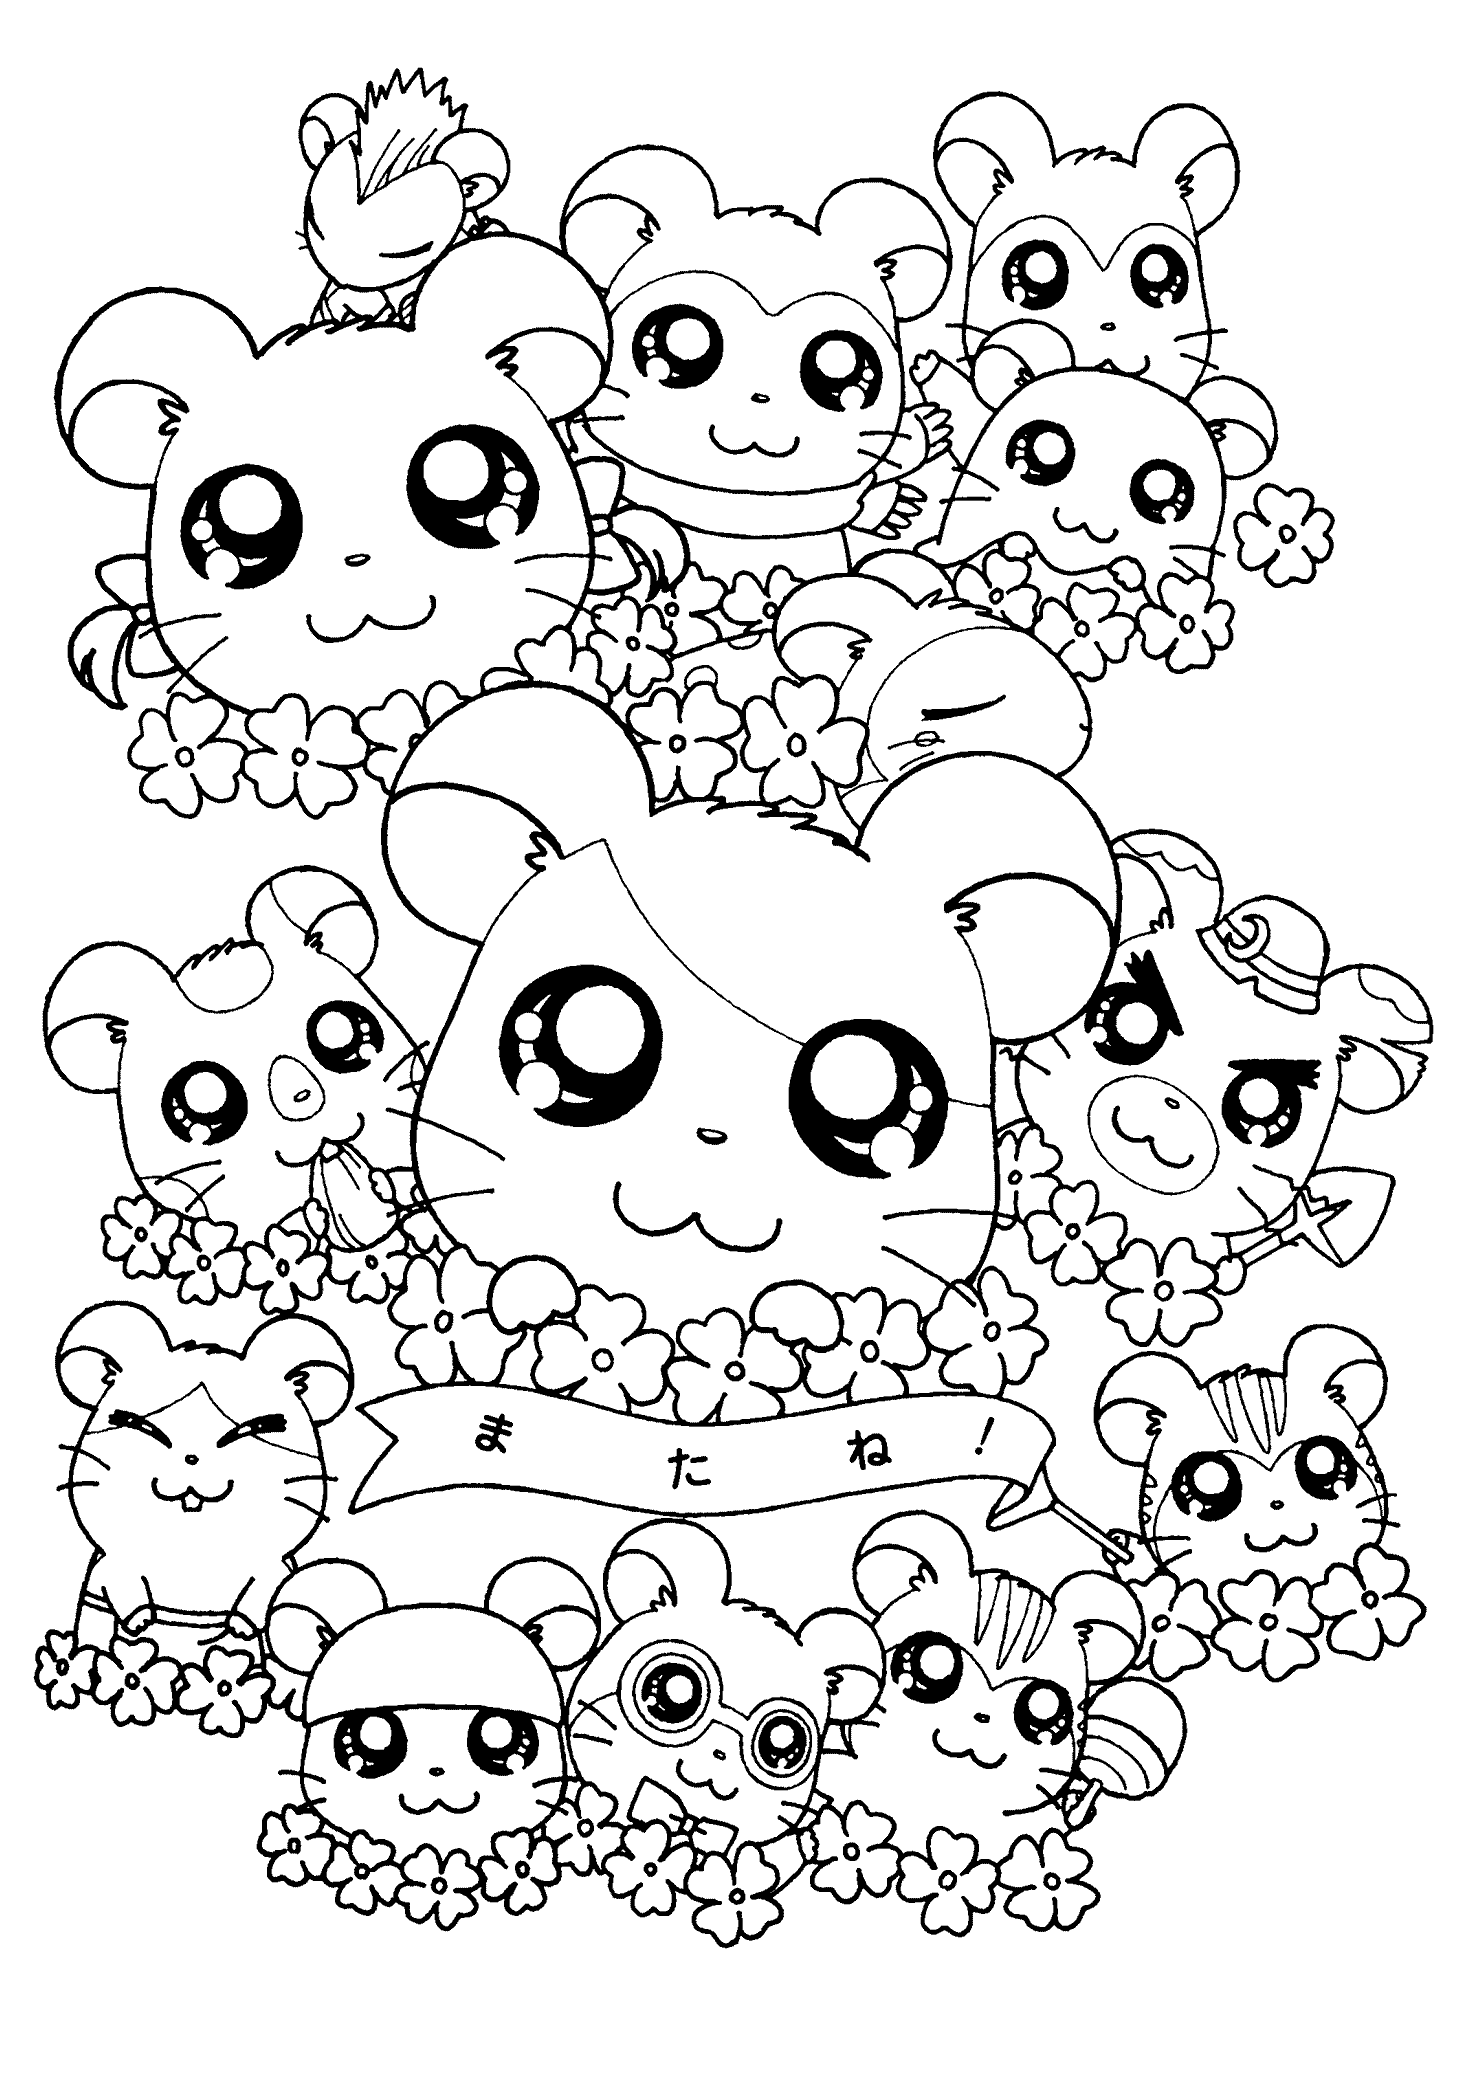 Anime Hamtaro Coloring Pages For Kids Printable Free Unicorn Coloring Pages Disney Co